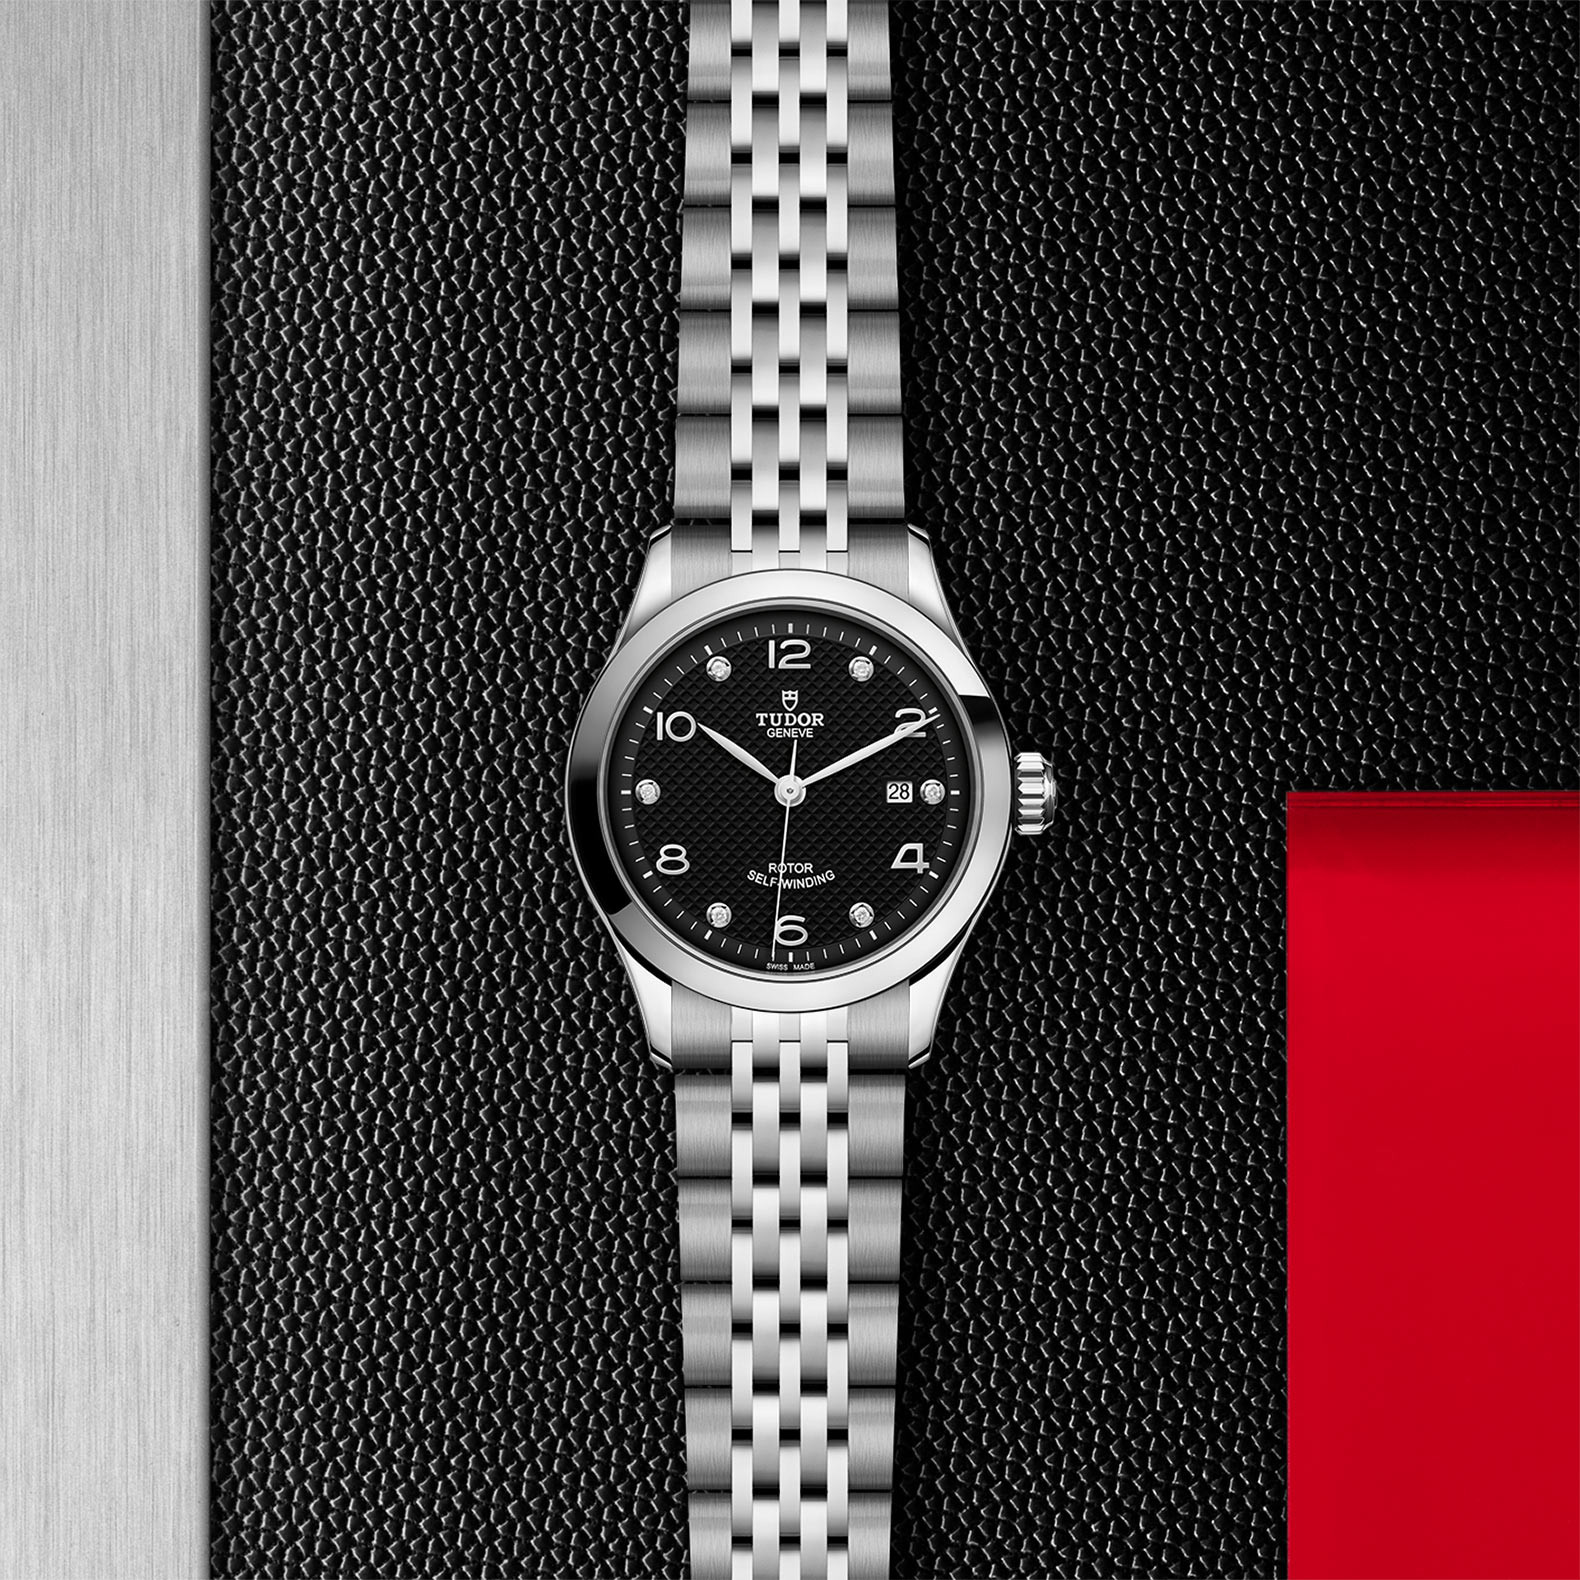 TUDOR 1926 Watch in Store Flat Lay